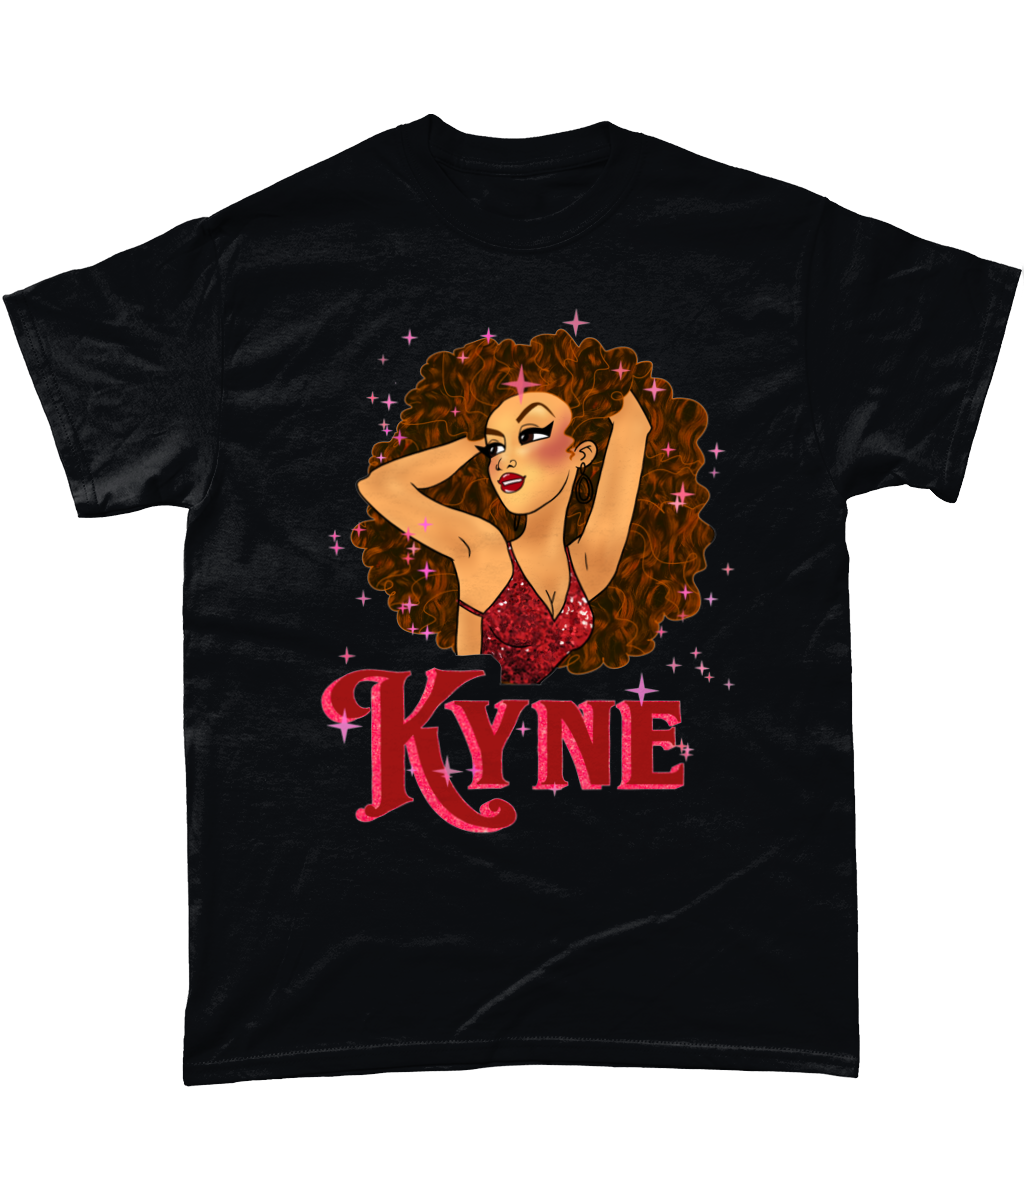 Kyne - In Stars T-Shirt - SNATCHED MERCH